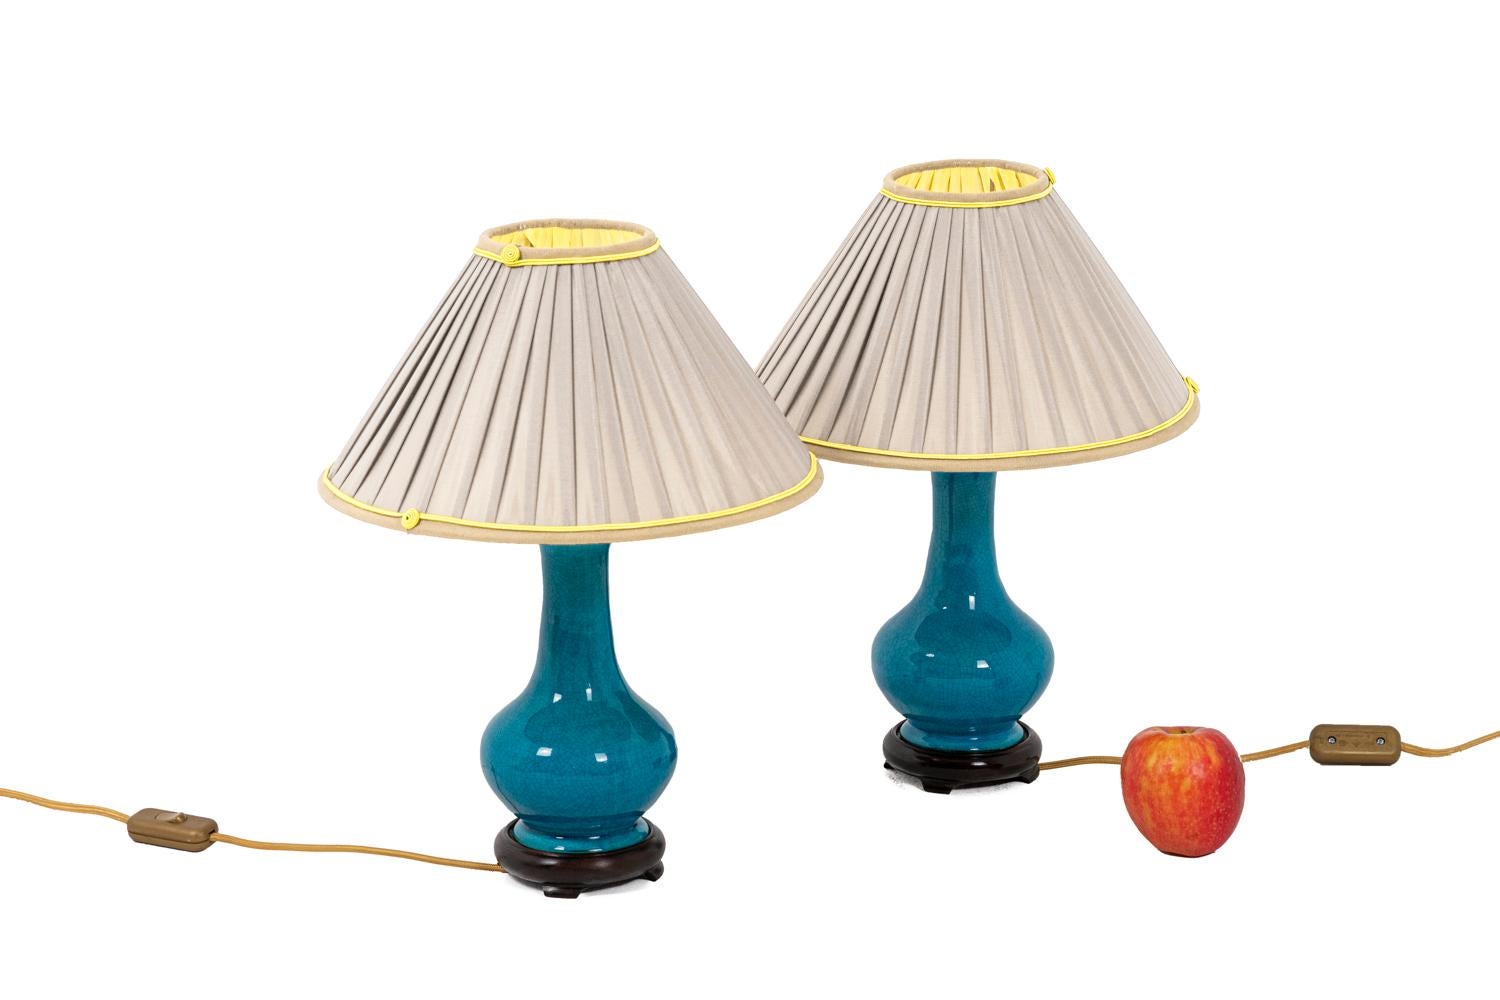 Pol Chambost, in the style of.

Pair of pear-shaped lamps in cracked blue ceramics. Quadripod circular base in black lacquered wood. Gilt bronze mount.

Work realized in the 20th century.

!The price doesn’t include the lampshade price. However, our